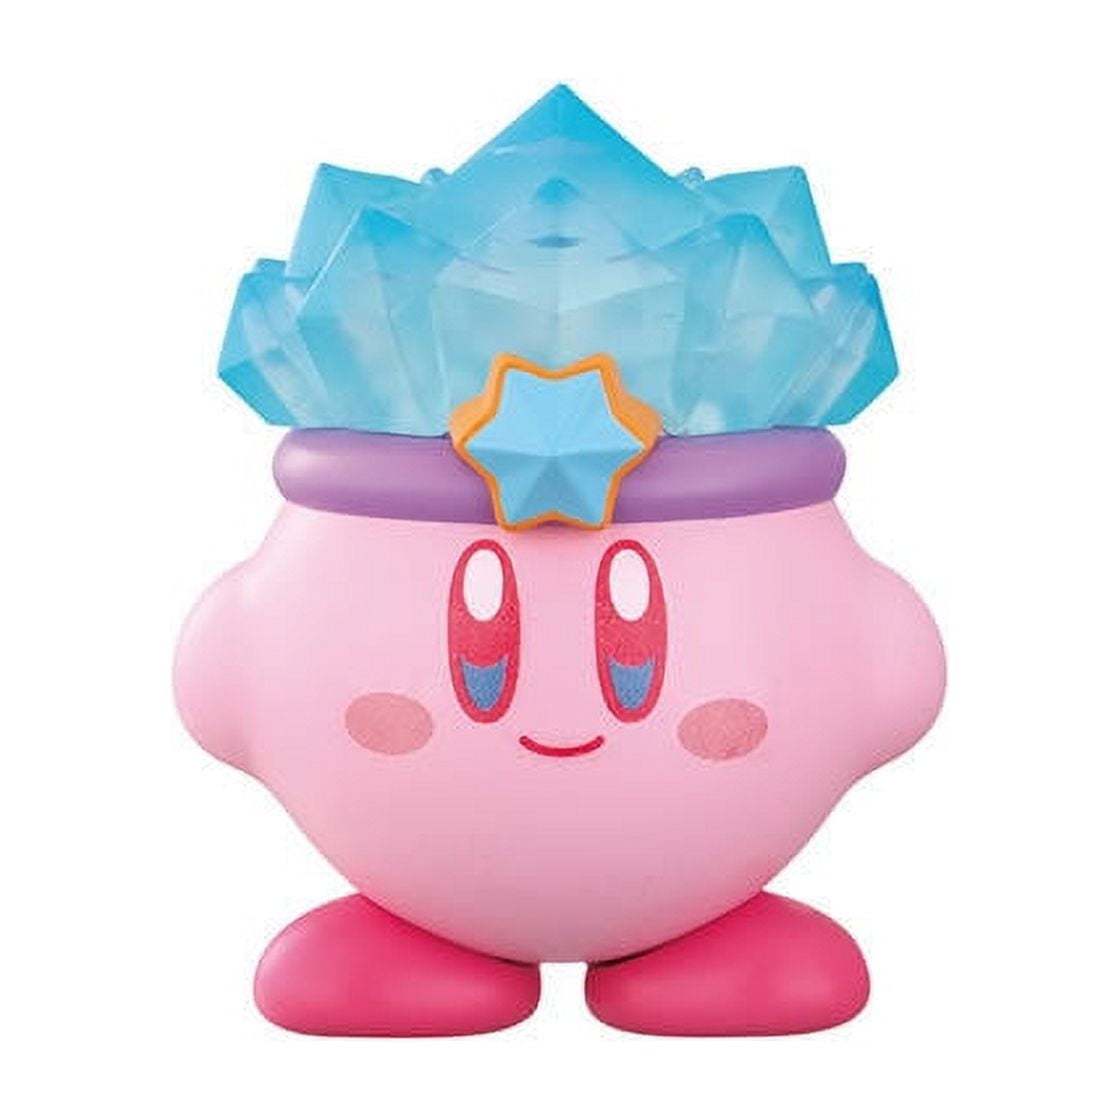 Kirby's Dreamland 1.5 Floating Kirby Cup-And-Ball Figure Gashapon